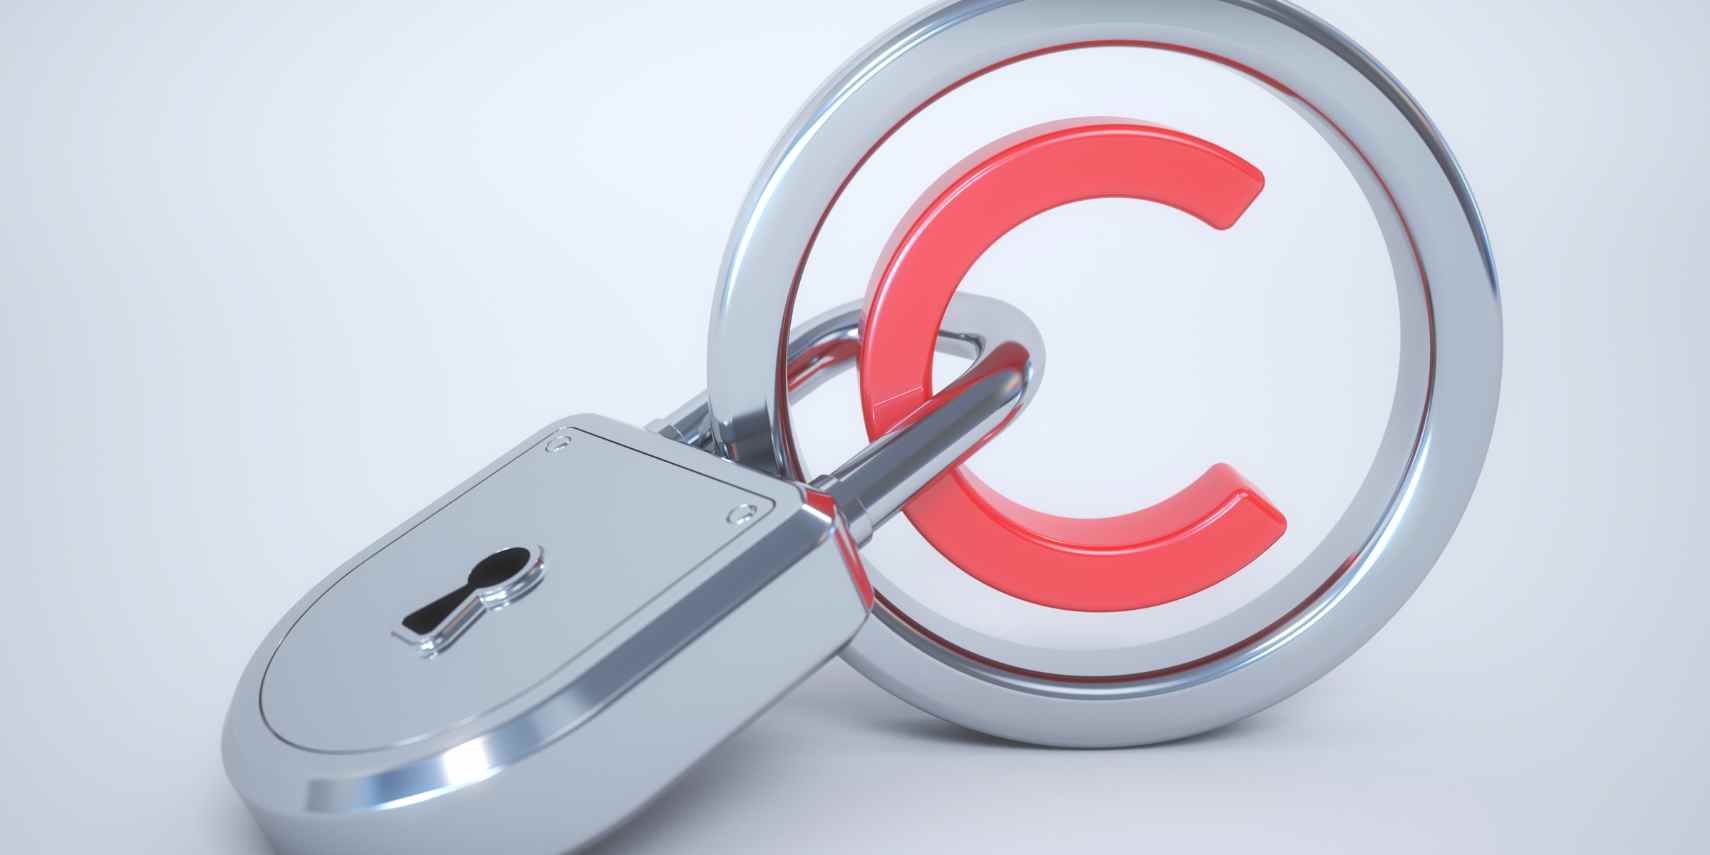 copyright protection of using the results generated by ChatGPT